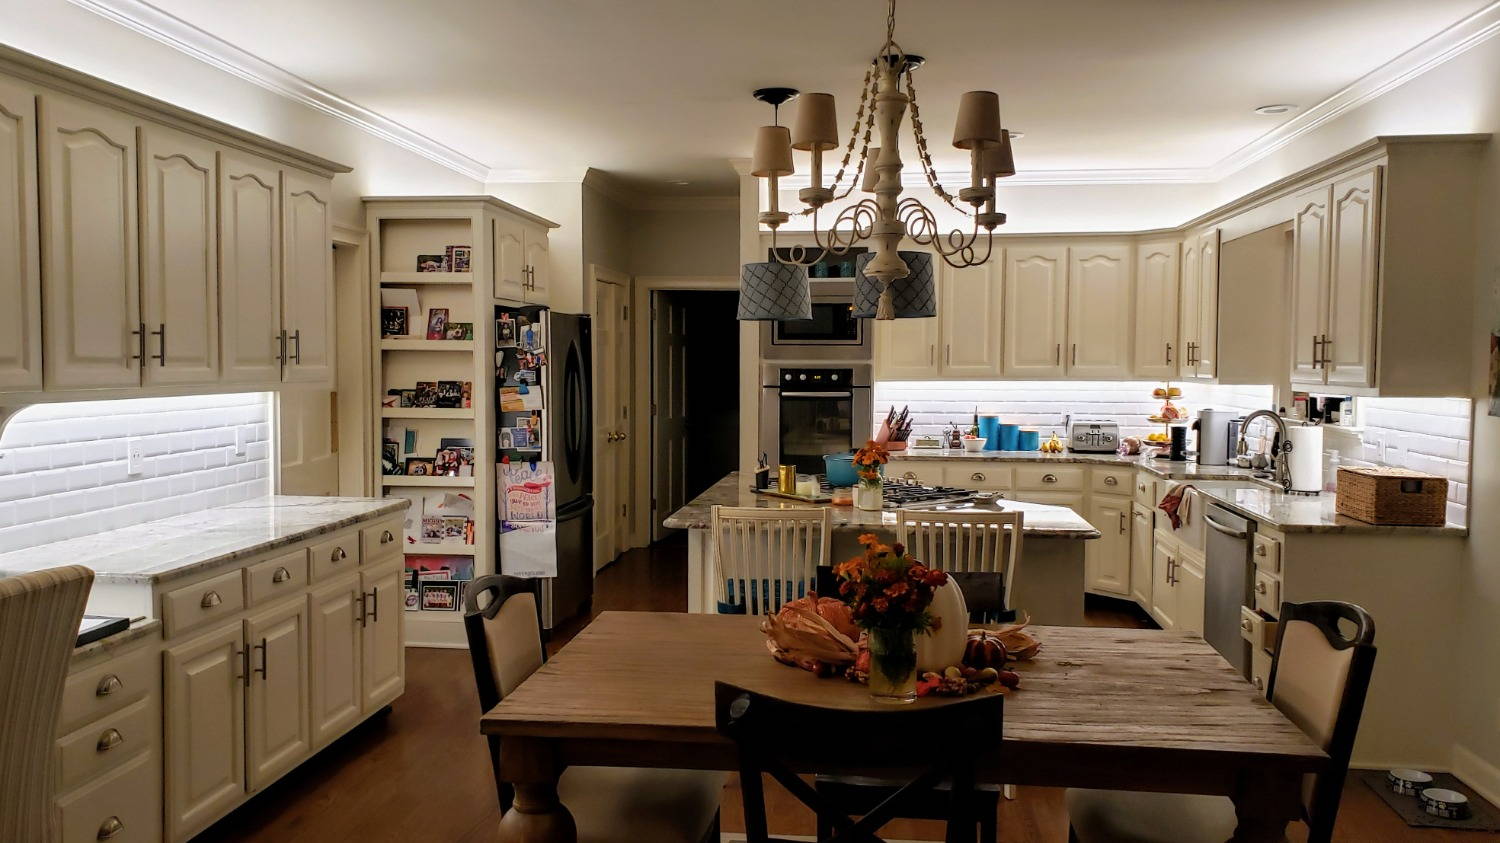 How to Choose and Install LED Under Cabinet Lighting   Simple ...